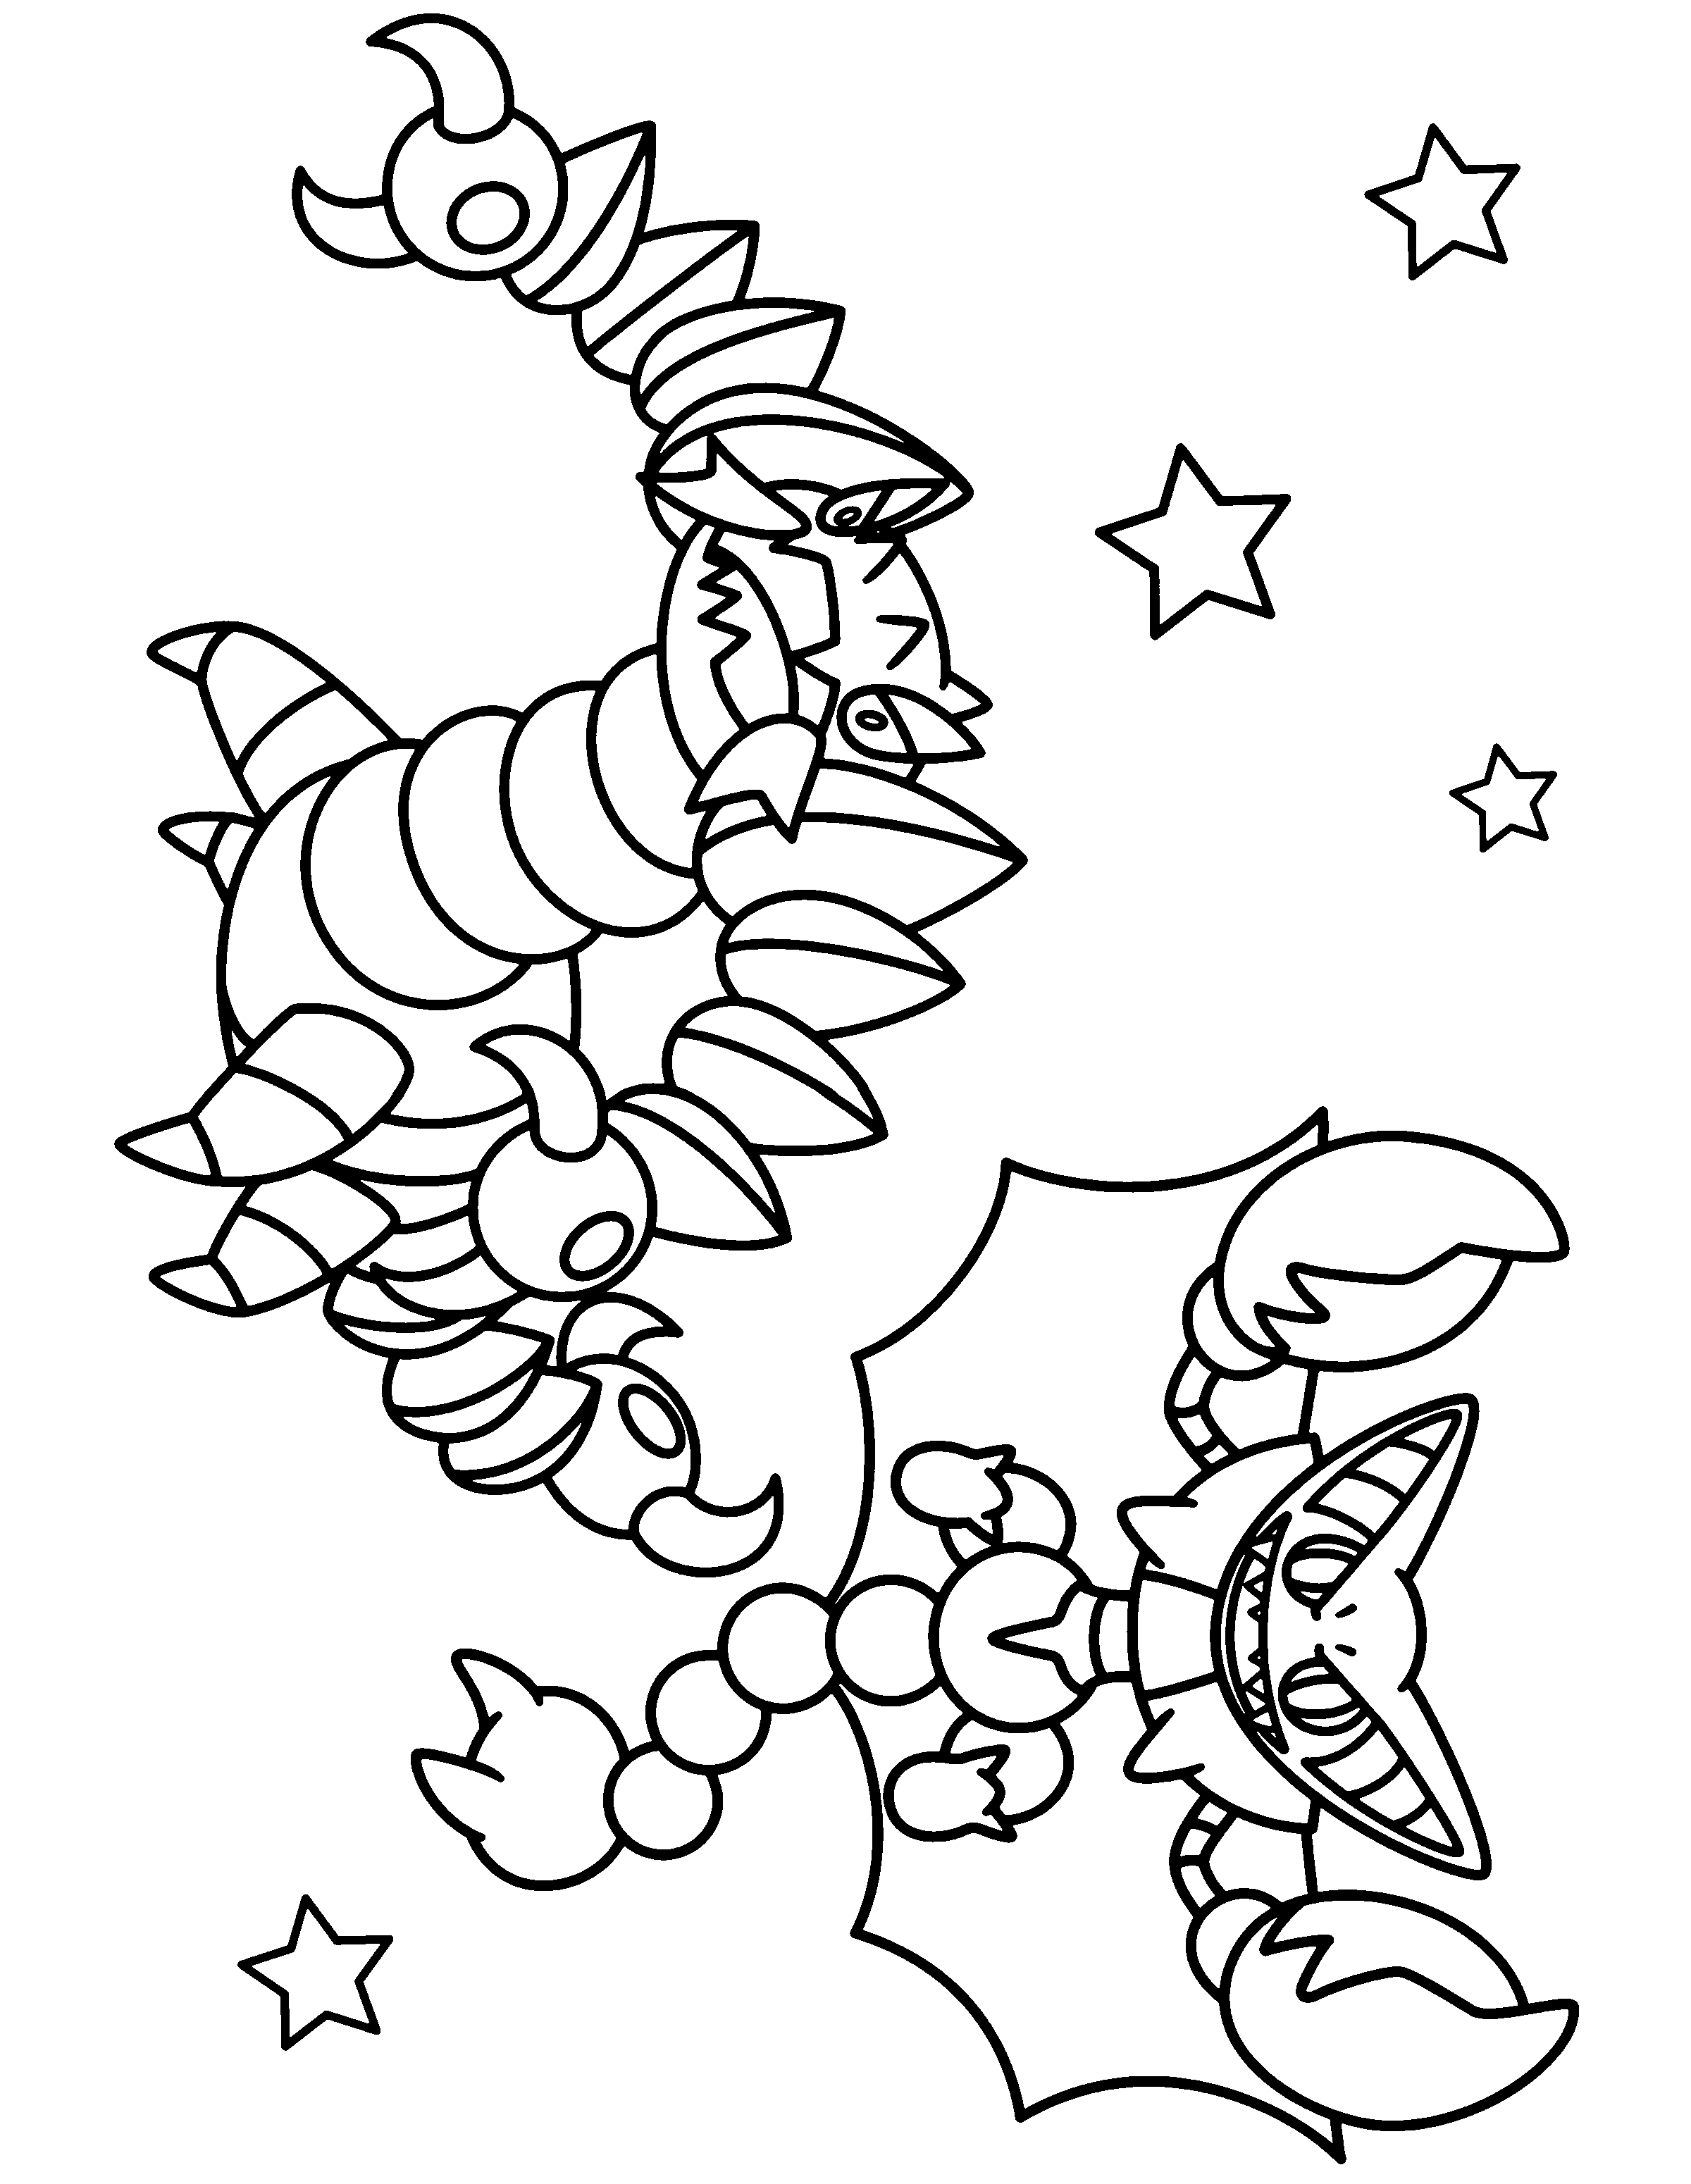 pokmon coloring pages pokemon coloring pages join your favorite pokemon on an pages coloring pokmon 1 1